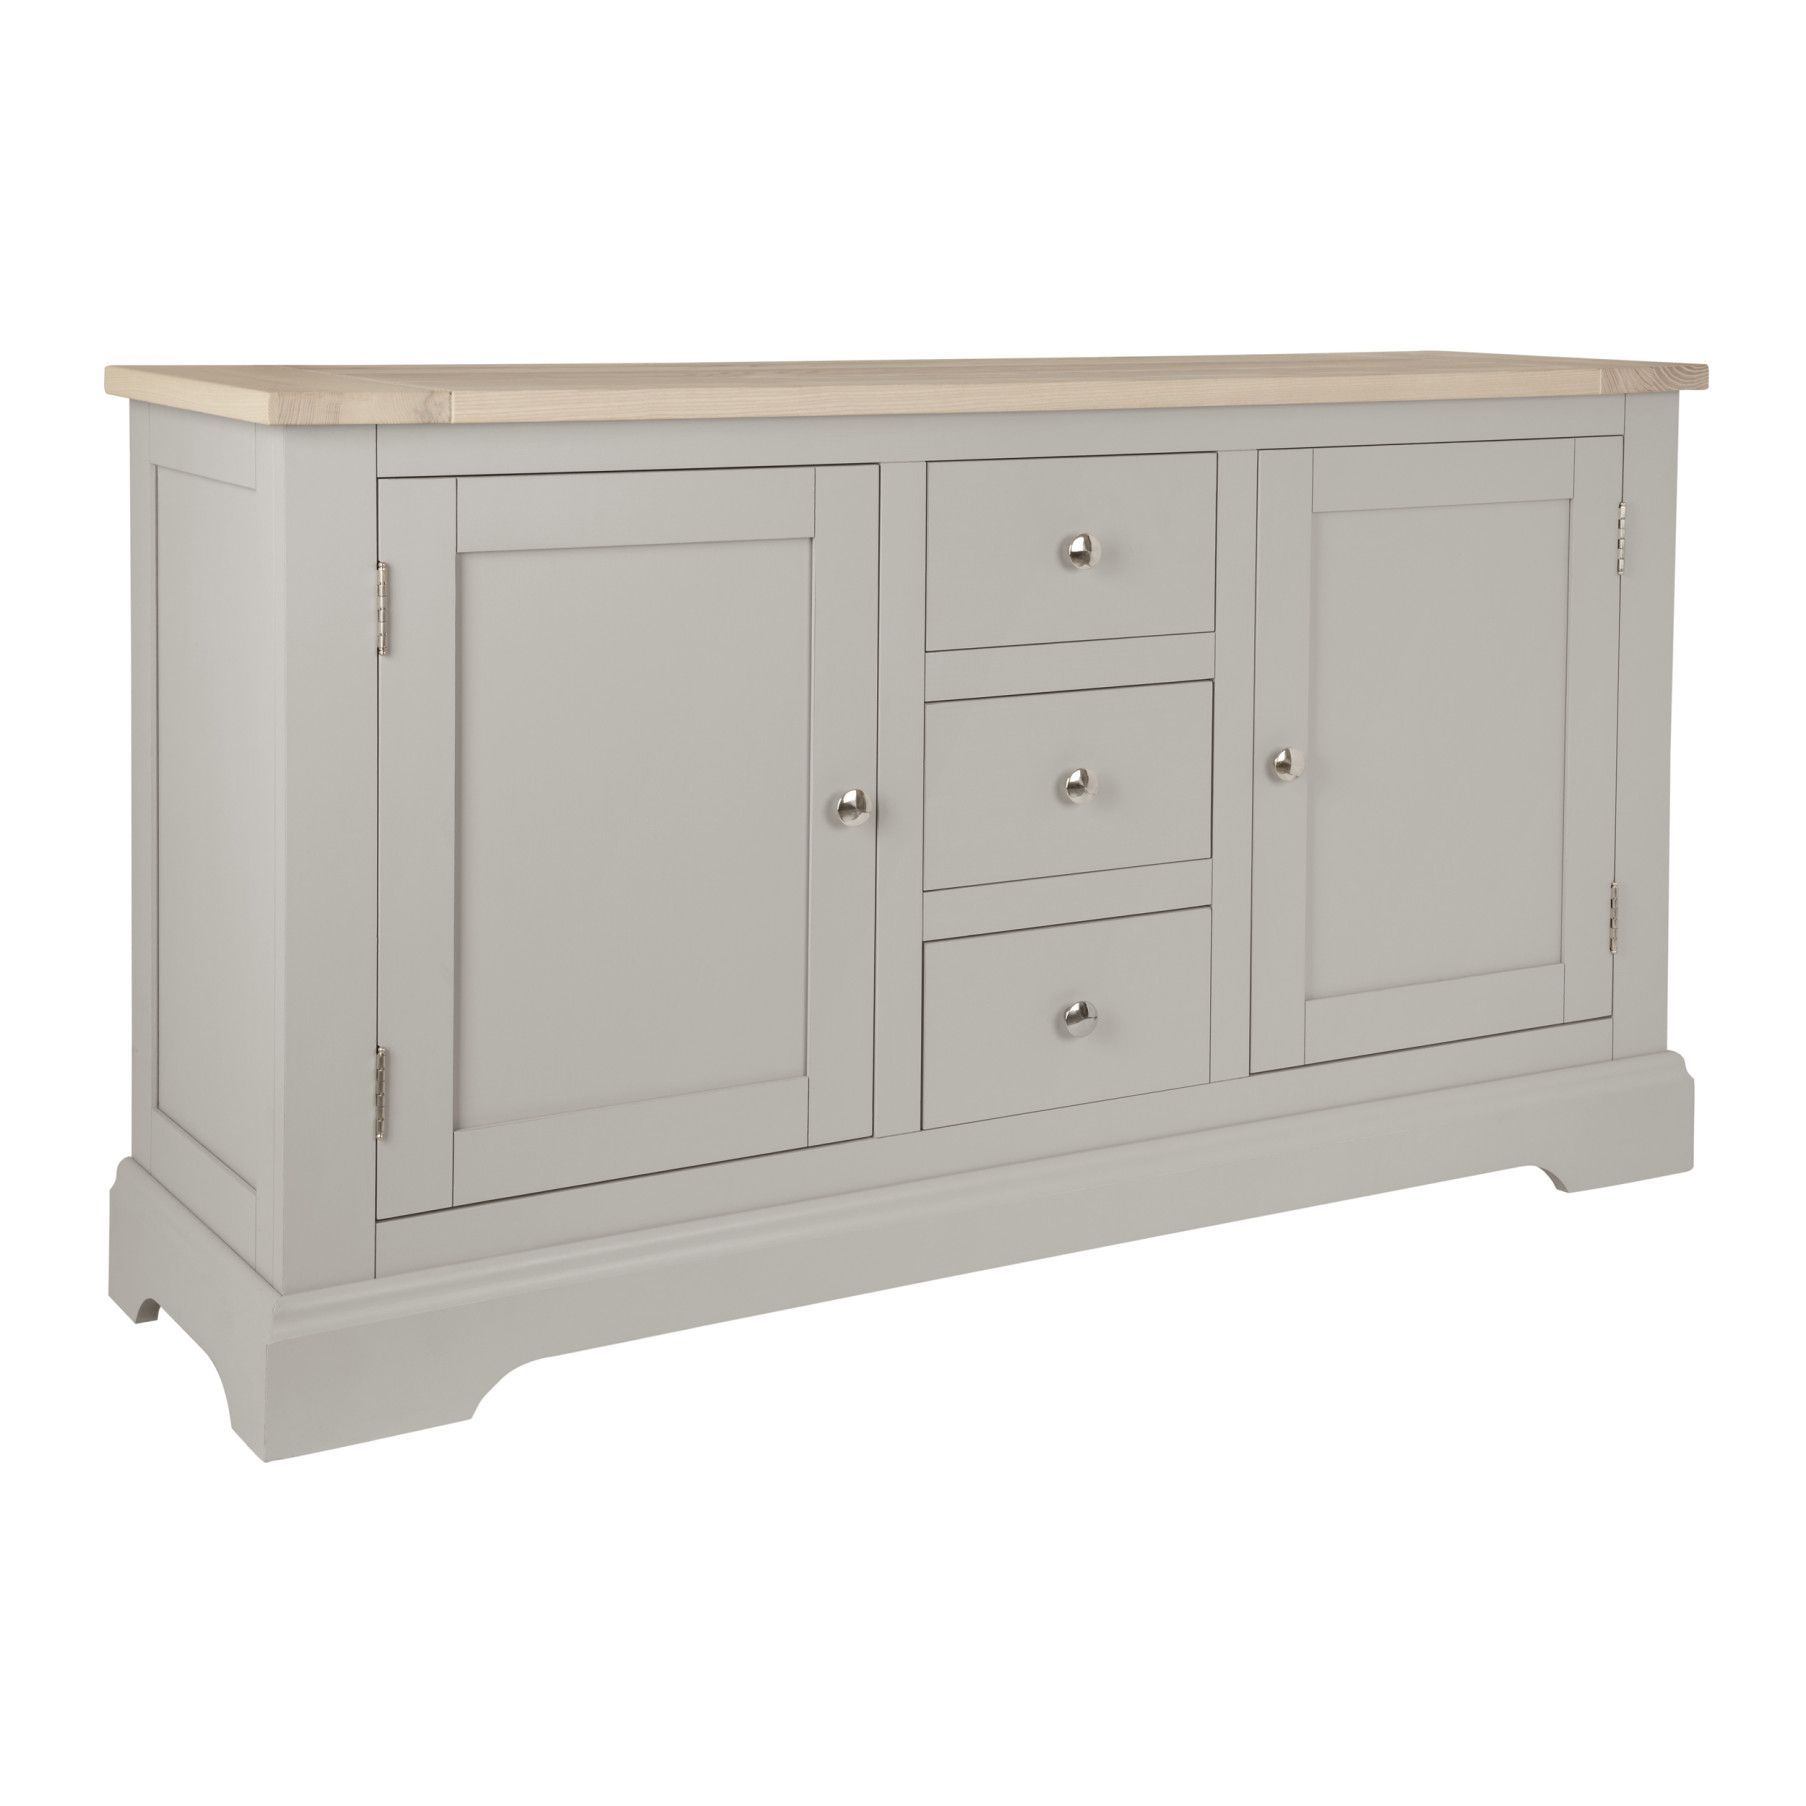 Made To Order Furniture – Dorset Pale French Grey 2 Door 3 Drawer Throughout Most Popular Oil Pale Finish 4 Door Sideboards (Photo 2 of 20)